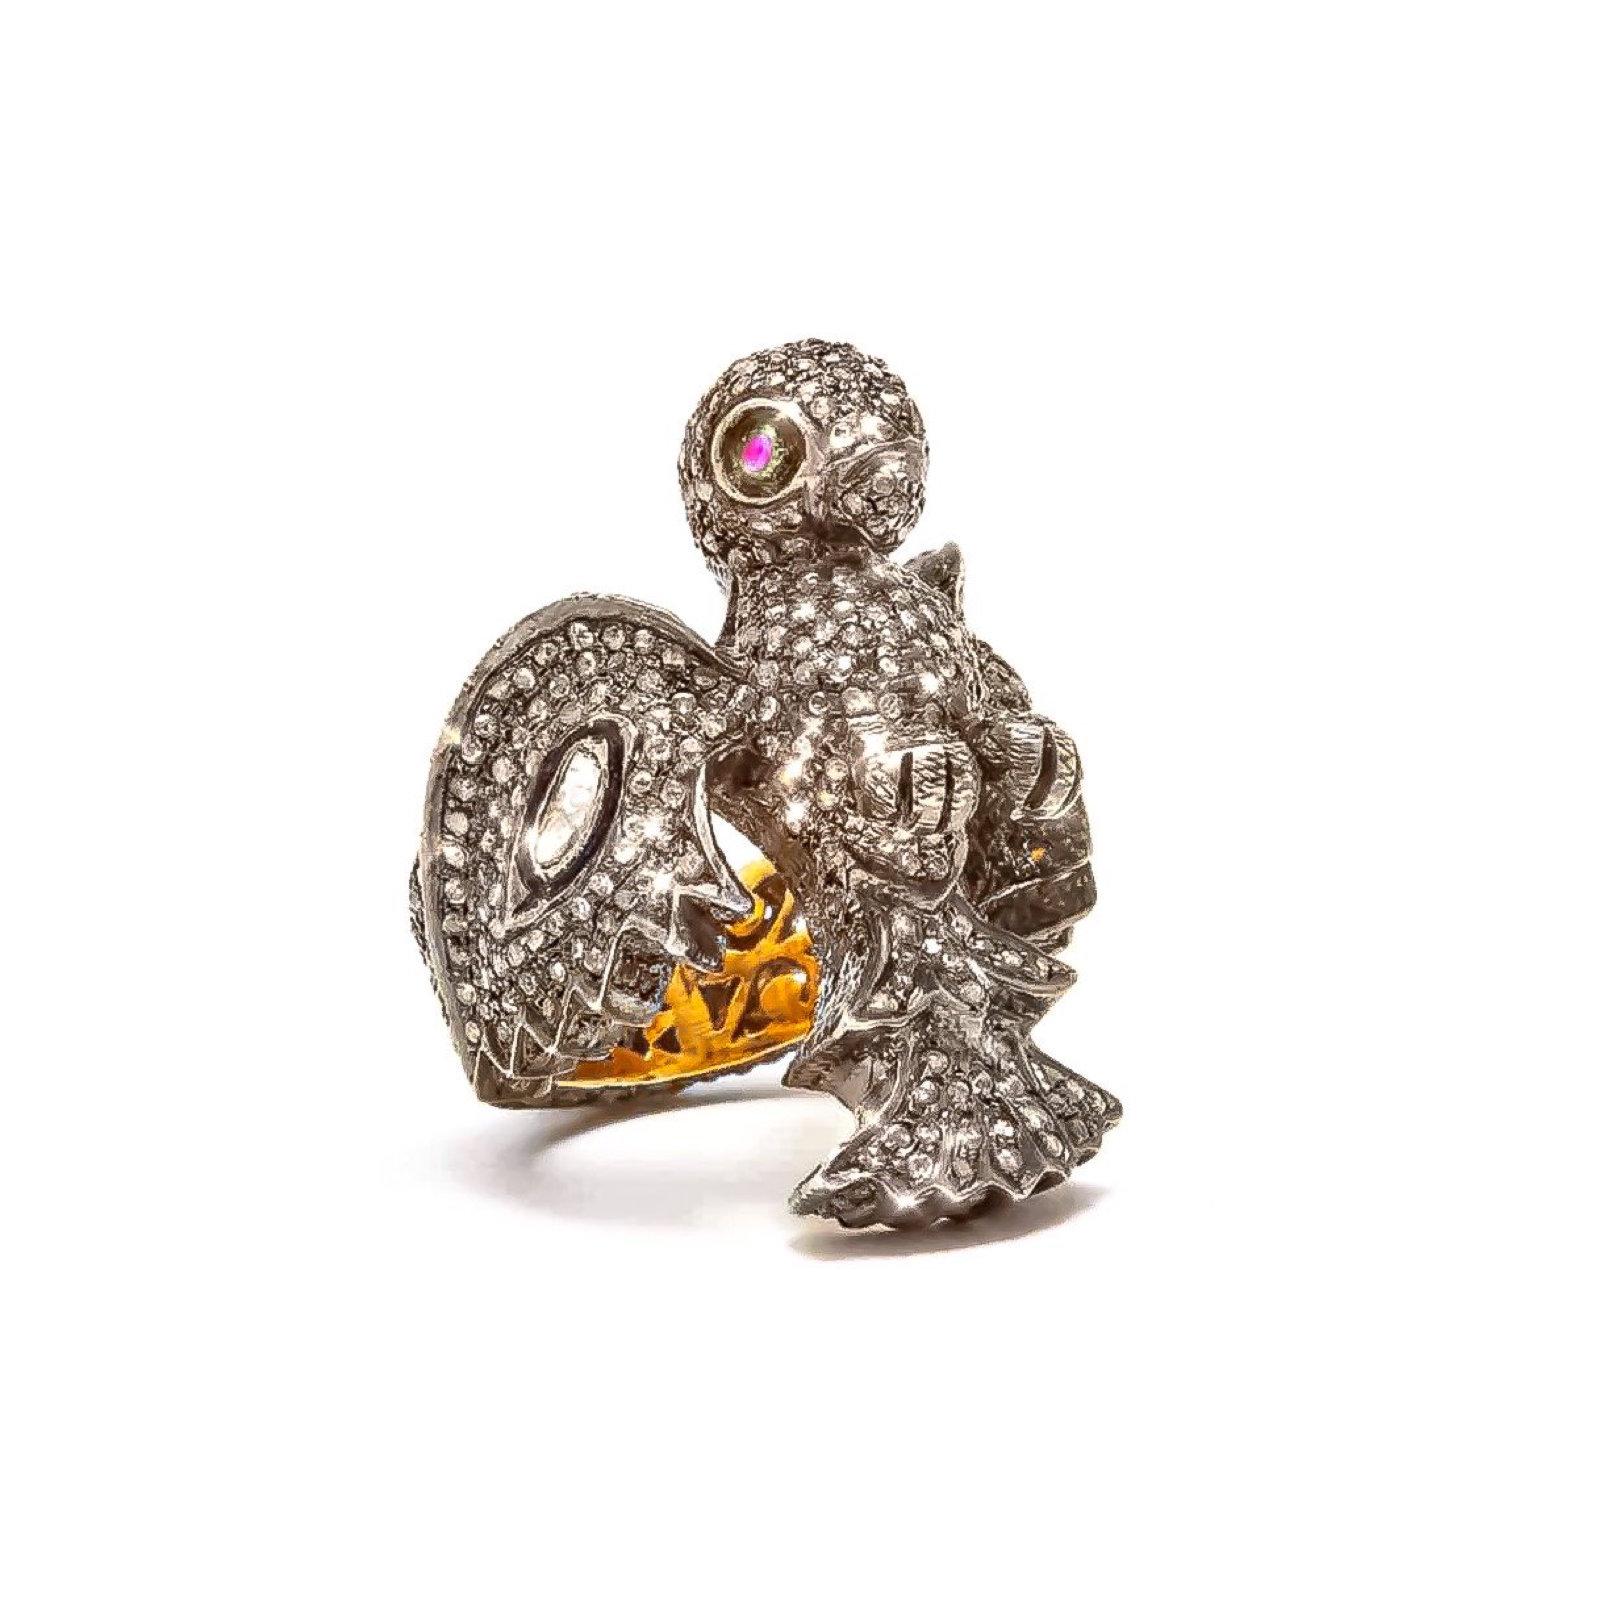 A stunning interpretation of the Goddess Laxmi’s mode of transportation, the owl. Incarnate by dazzling White Diamond wings and fiery Pink Ruby eyes in a fully Pavé Diamond ring. This beautiful ring is set in Oxidized Silver with an 18 Karat Gold